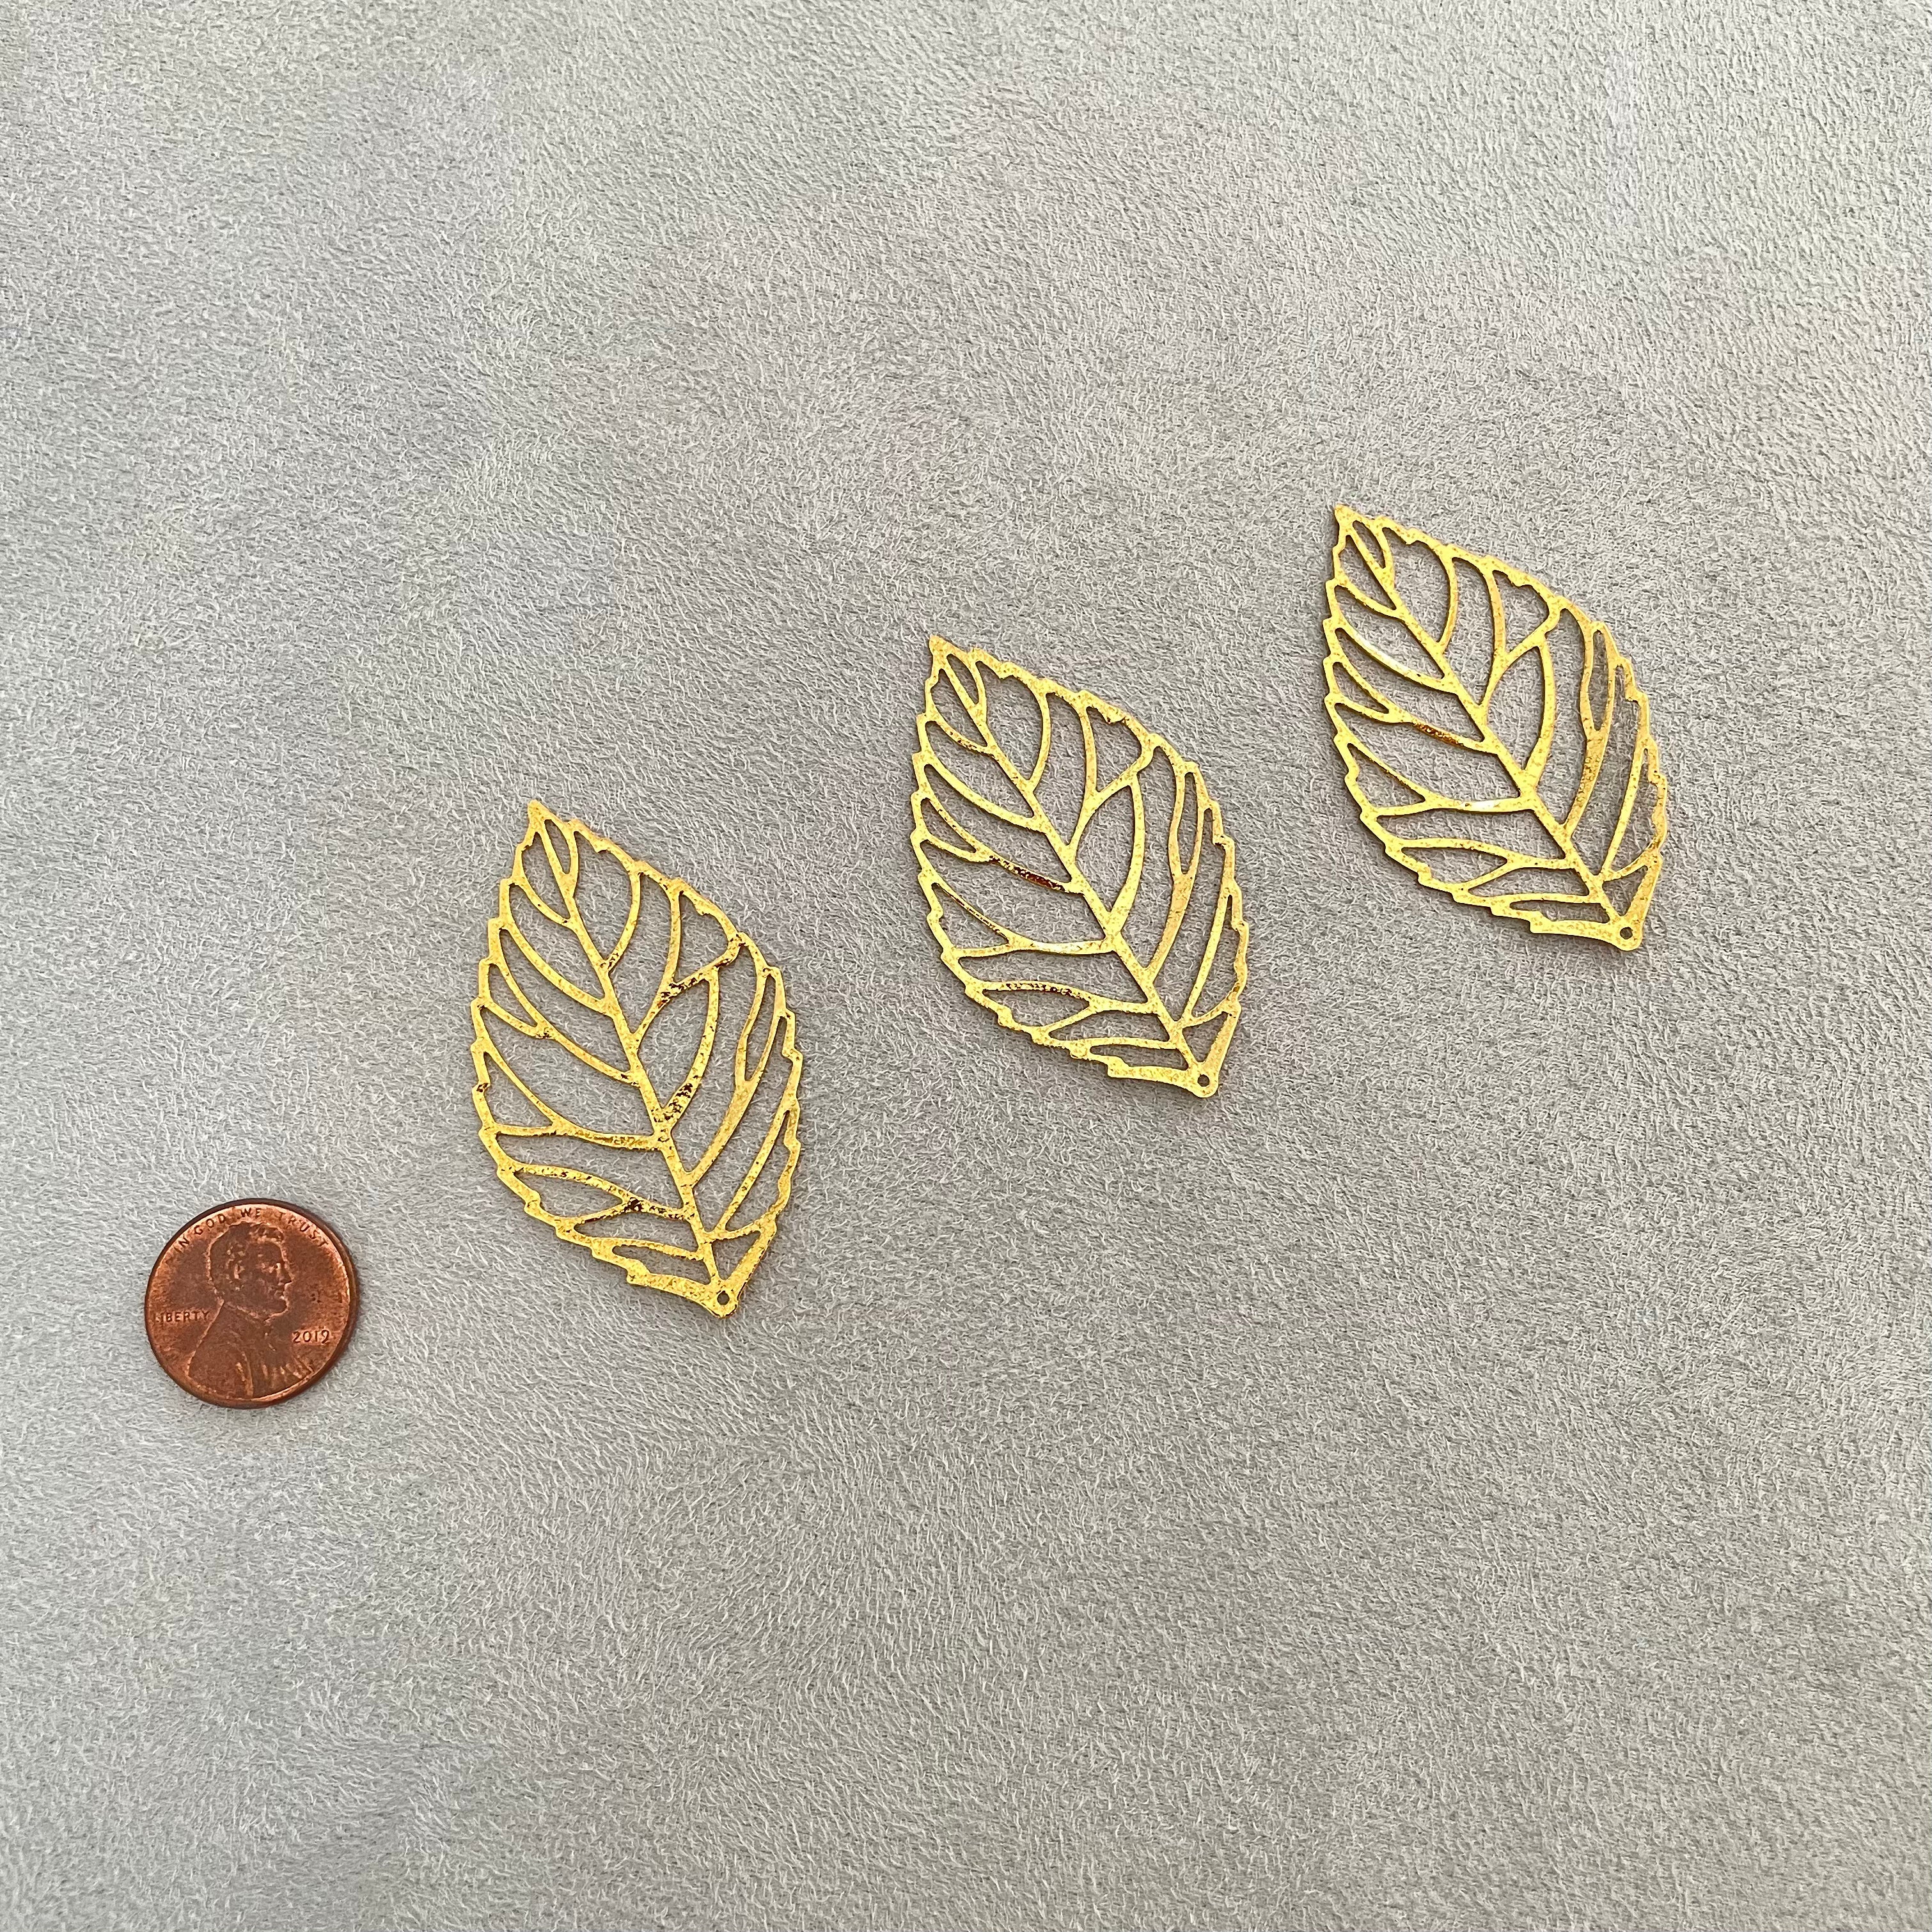 3 gold styling leaves,, penny beside for size reference  - flat lay props from Champagne & GRIT